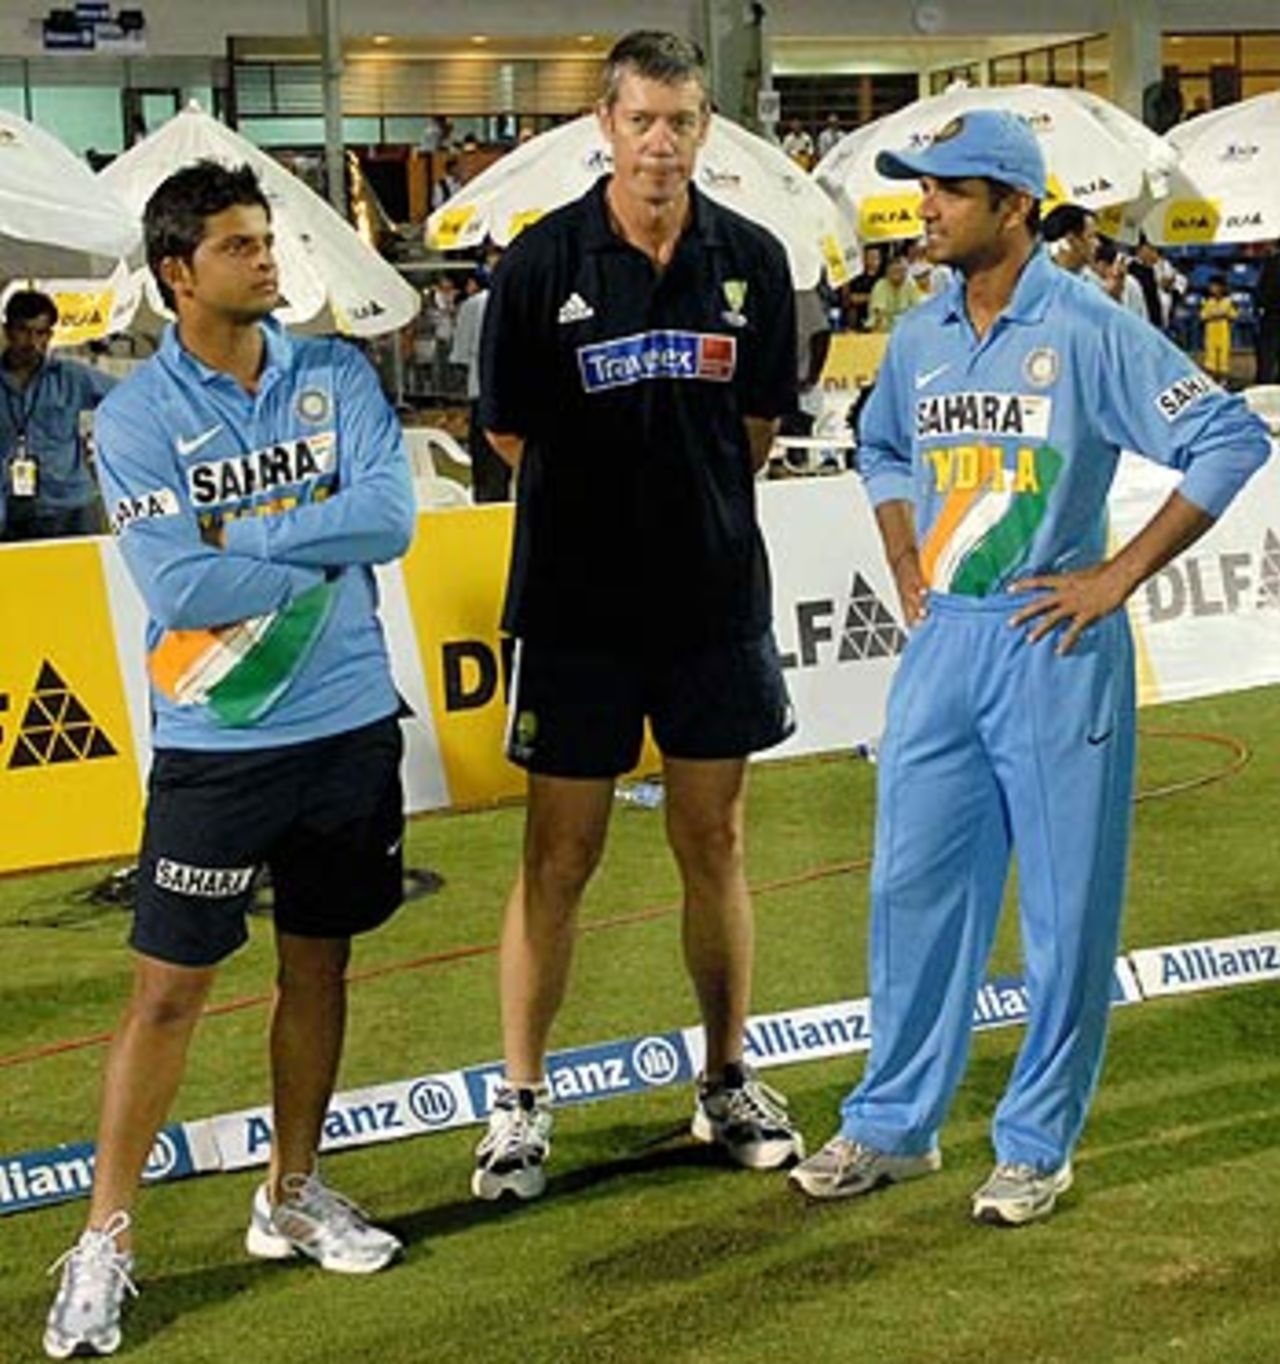 Suresh Raina, John Buchanan and Rahul Dravid share a moment after India's exit from the DLF Cup, Australia v India, 6th match, DLF Cup, Kinrara Oval, Kuala Lumpur, September 22, 2006